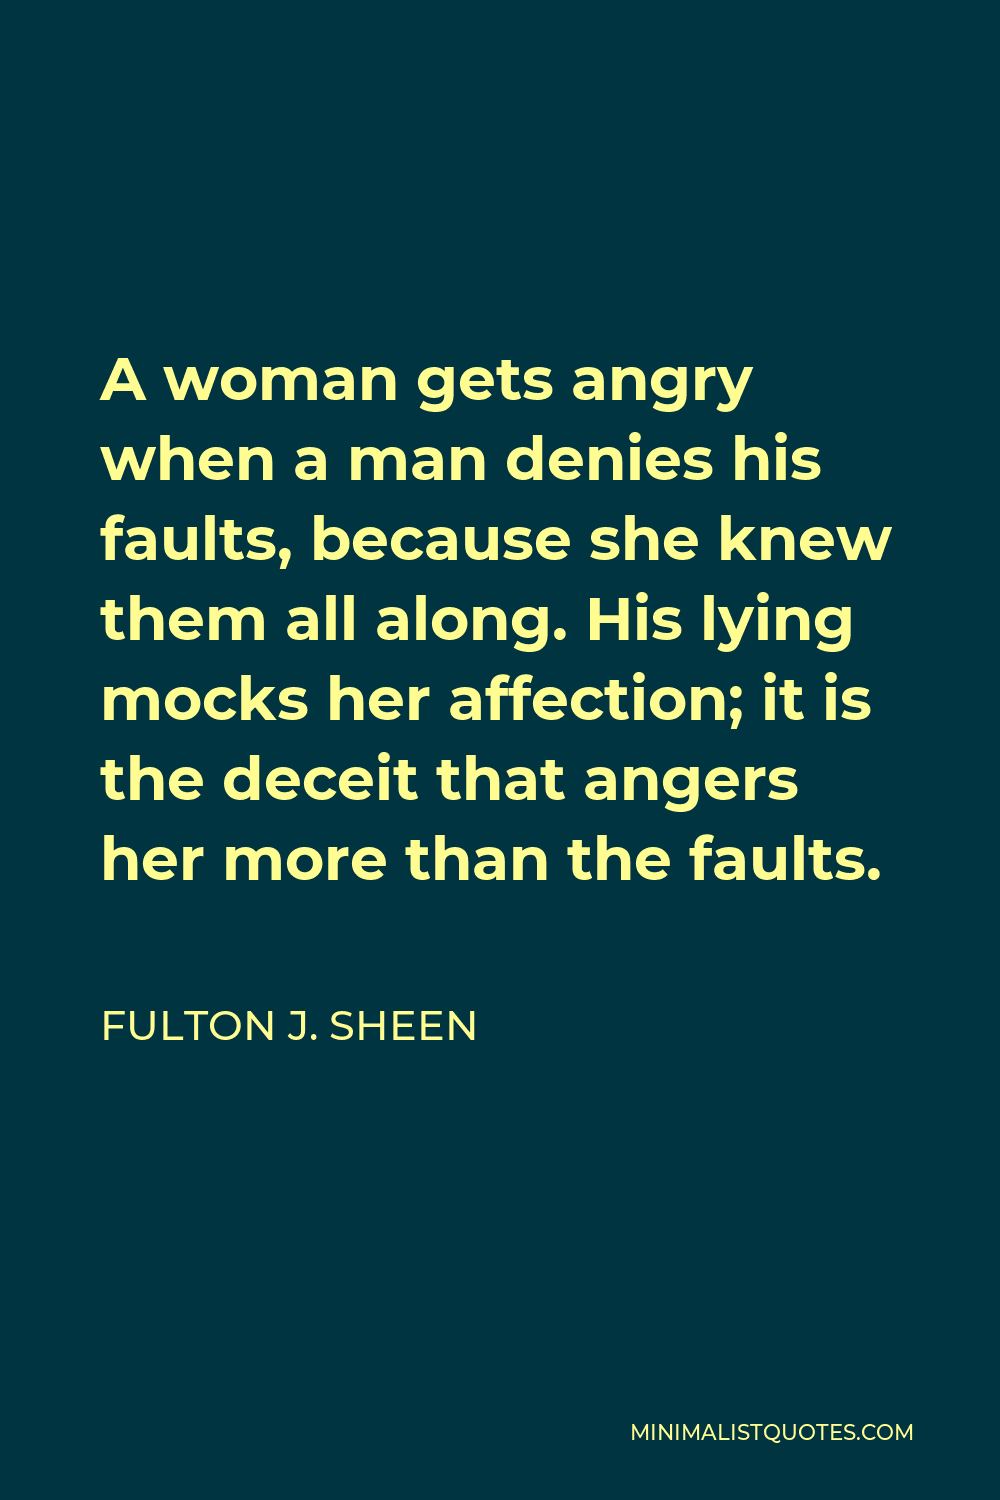 Fulton J. Sheen Quote - A woman gets angry when a man denies his faults, because she knew them all along. His lying mocks her affection; it is the deceit that angers her more than the faults.